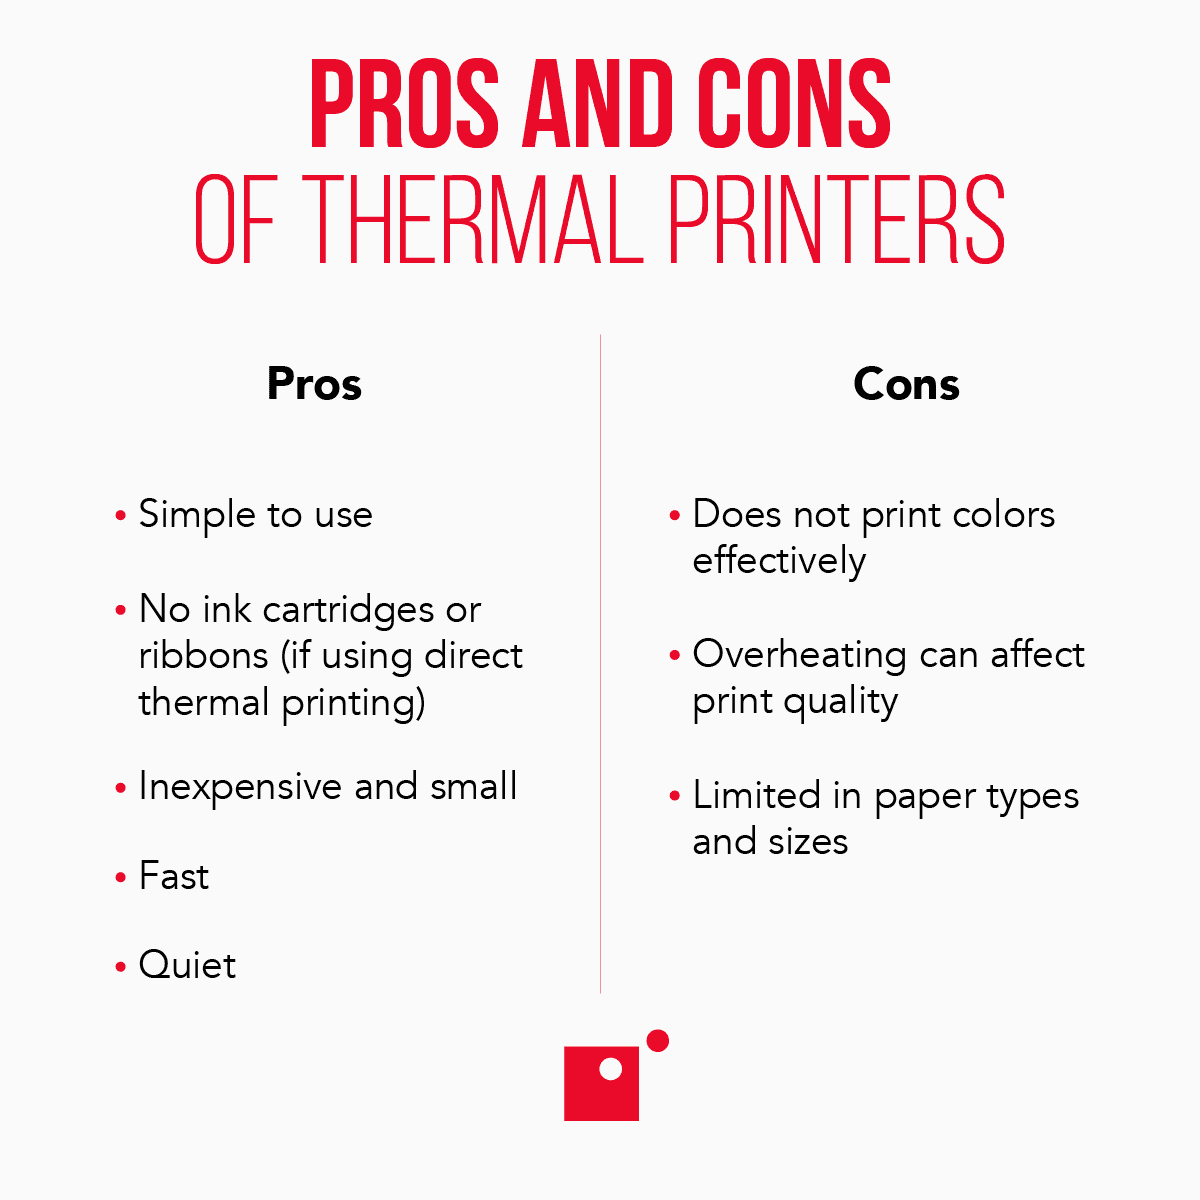 pros and cons of thermal printers